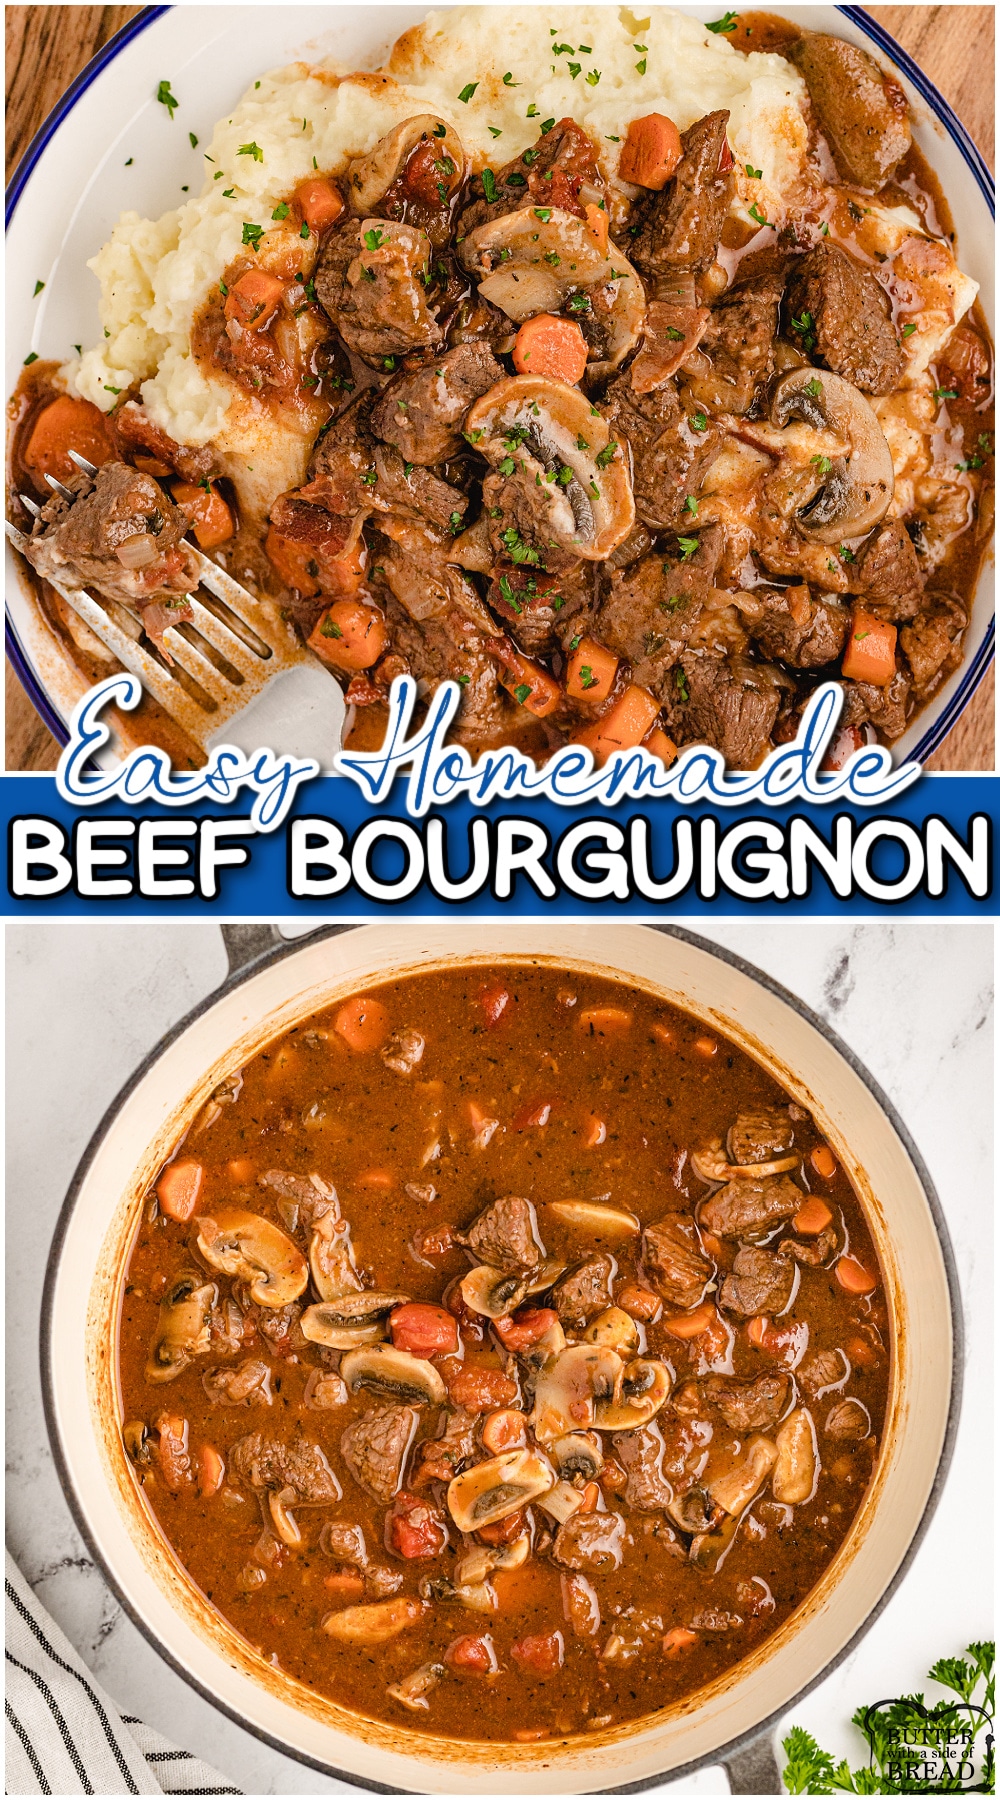 Easy beef bourguignon recipe is a rich, flavorful beef stew that's traditionally served over mashed potatoes for a hearty meal. This easy version is simplified for home cooks but still tastes incredible! 